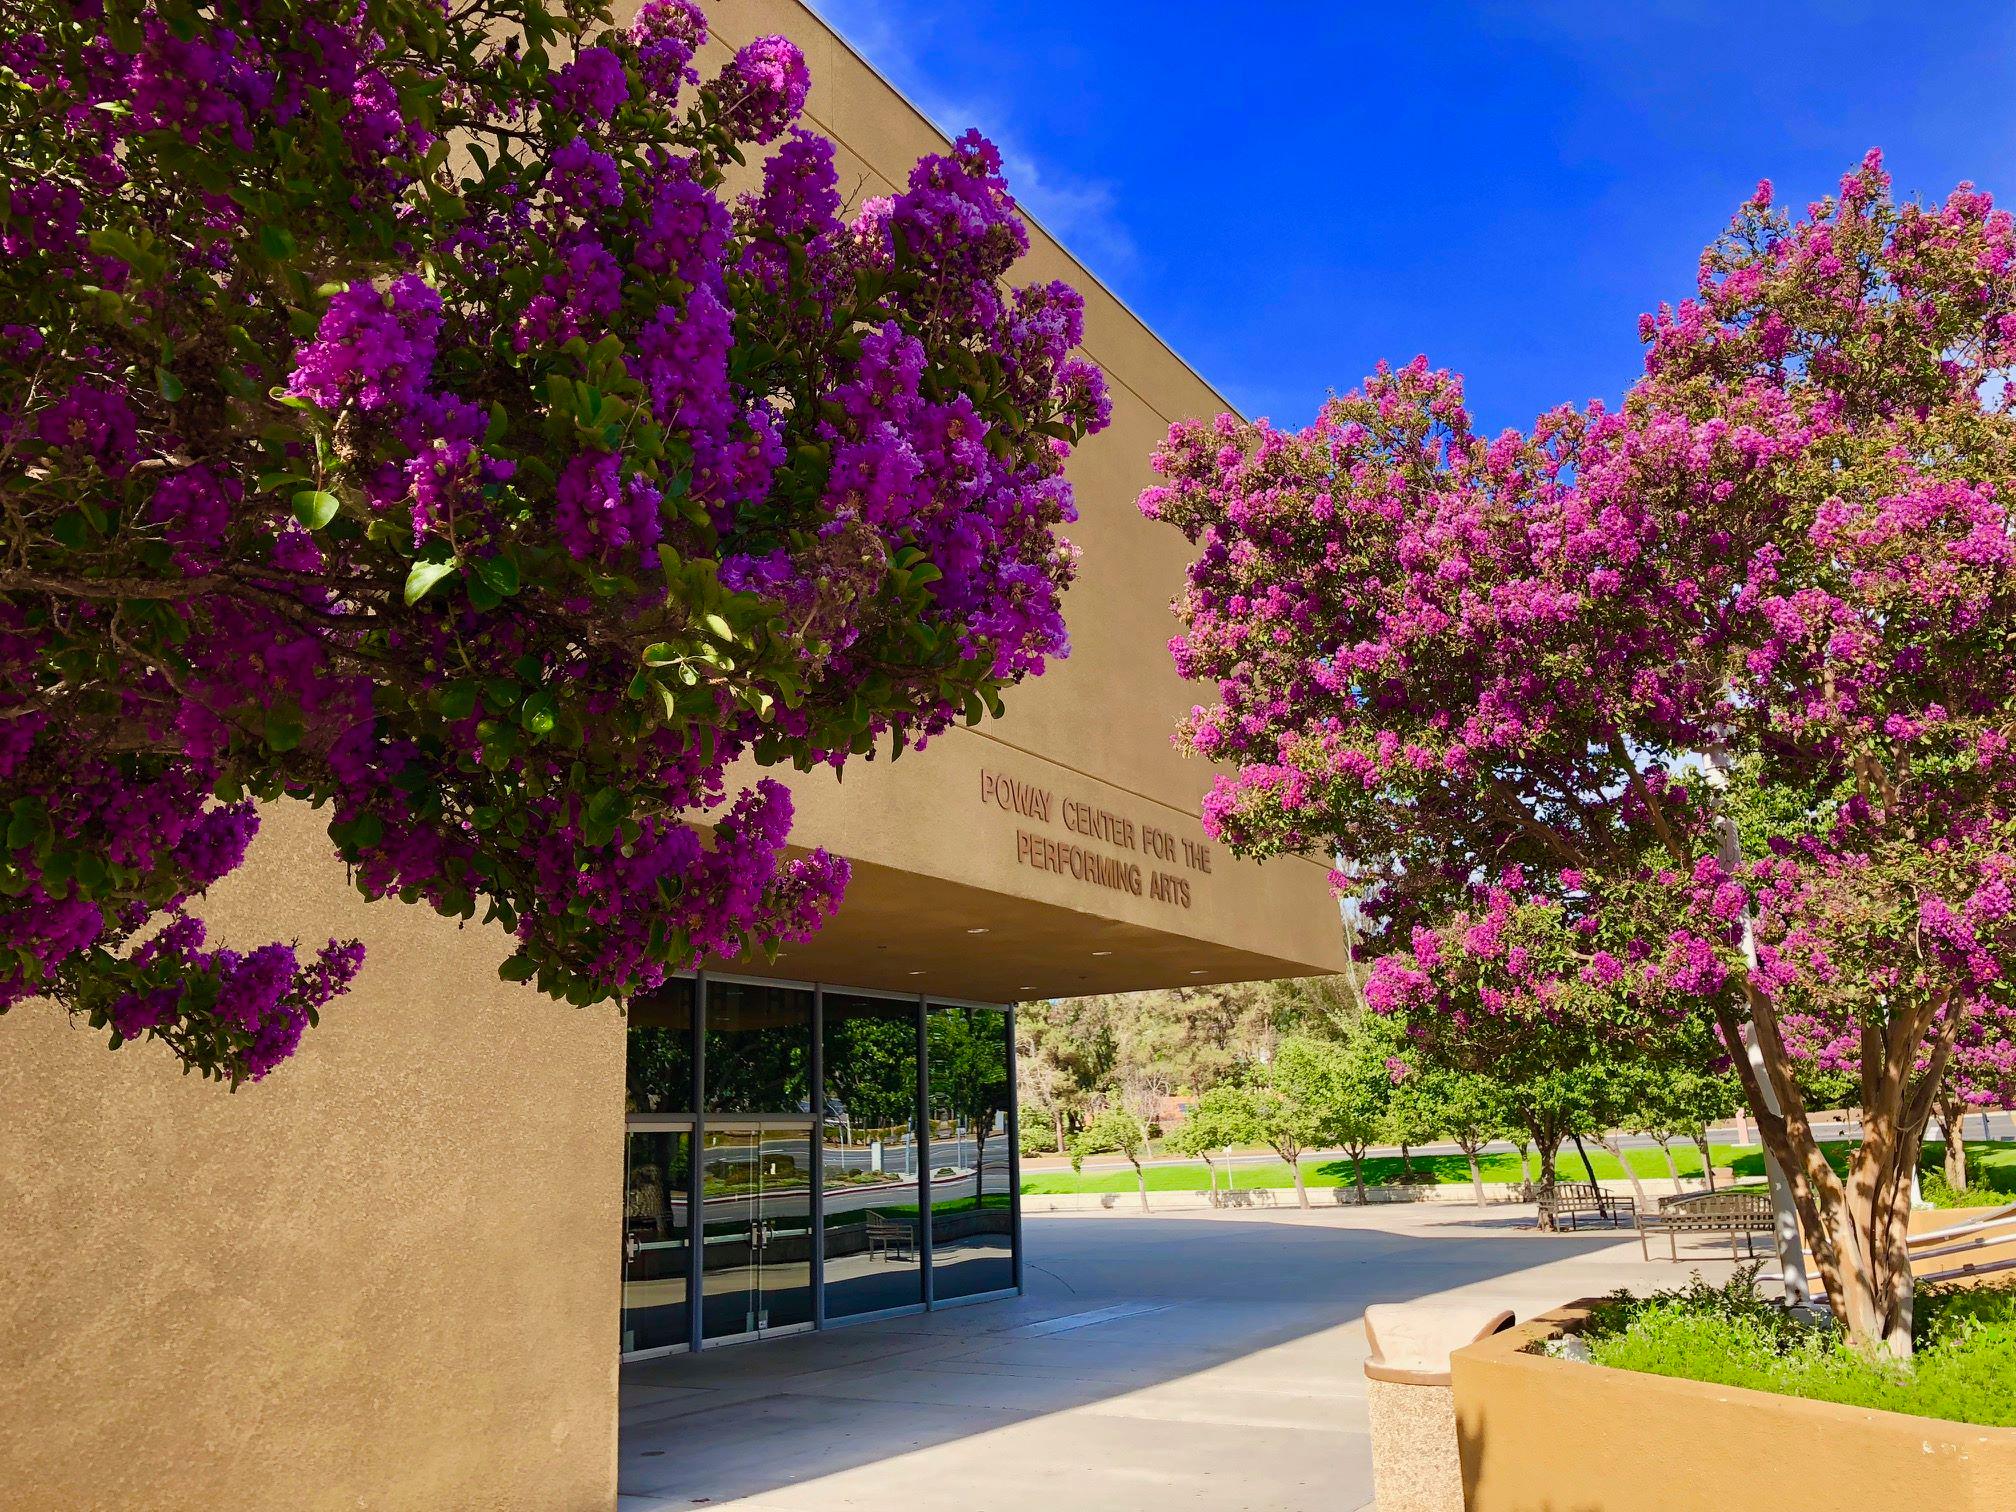 Poway Center for the Performing Arts